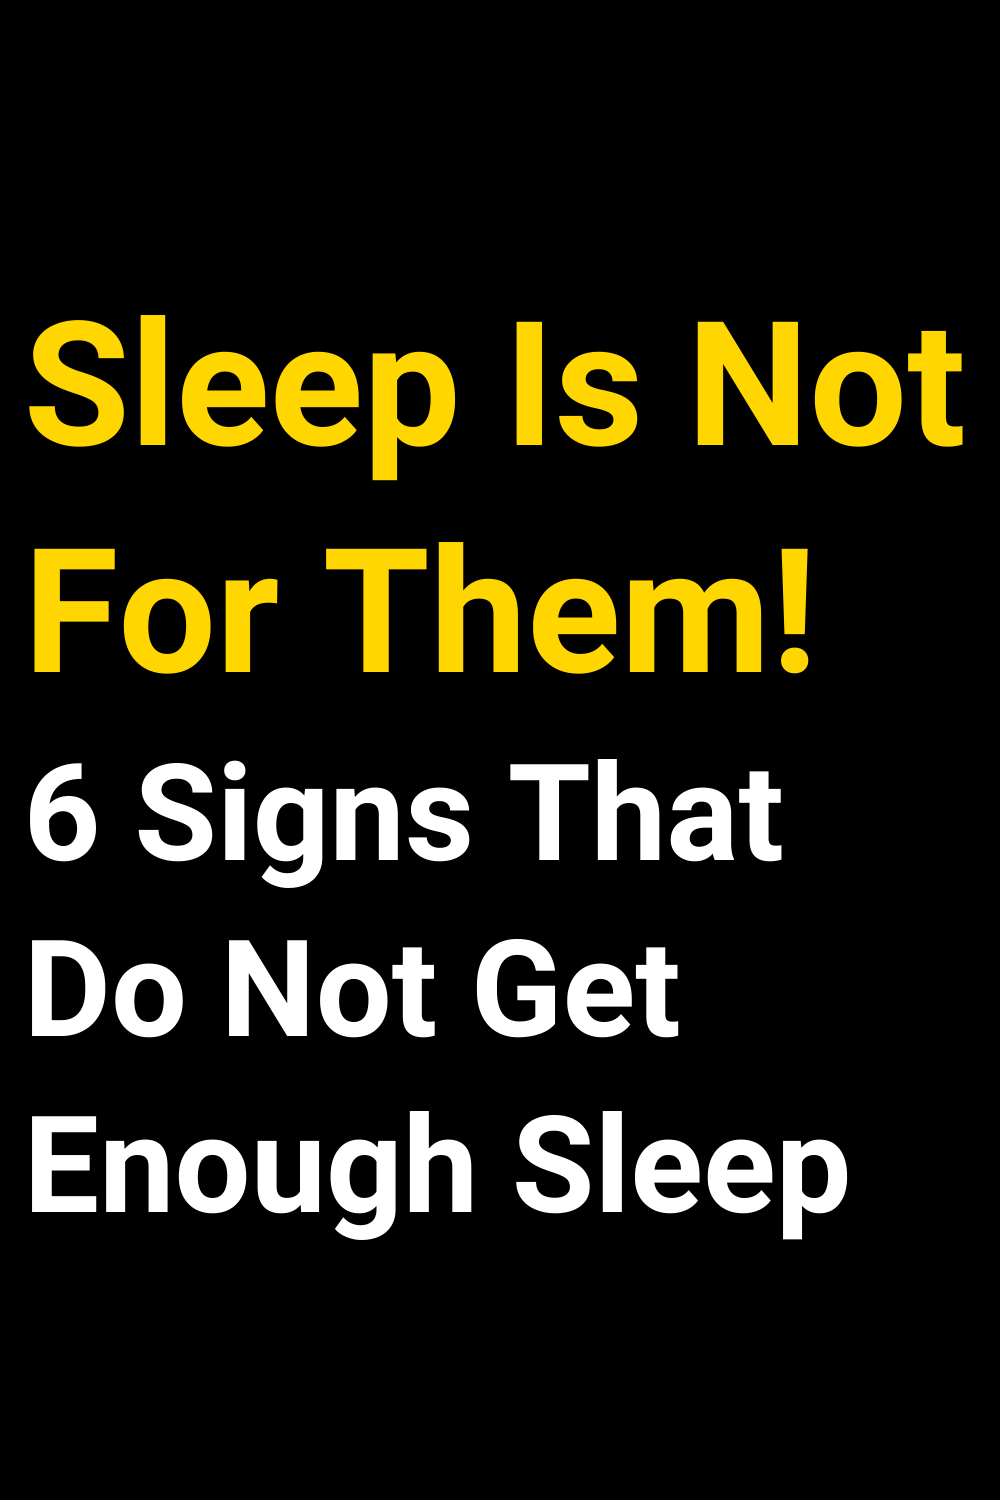 Sleep Is Not For Them! 6 Signs That Do Not Get Enough Sleep